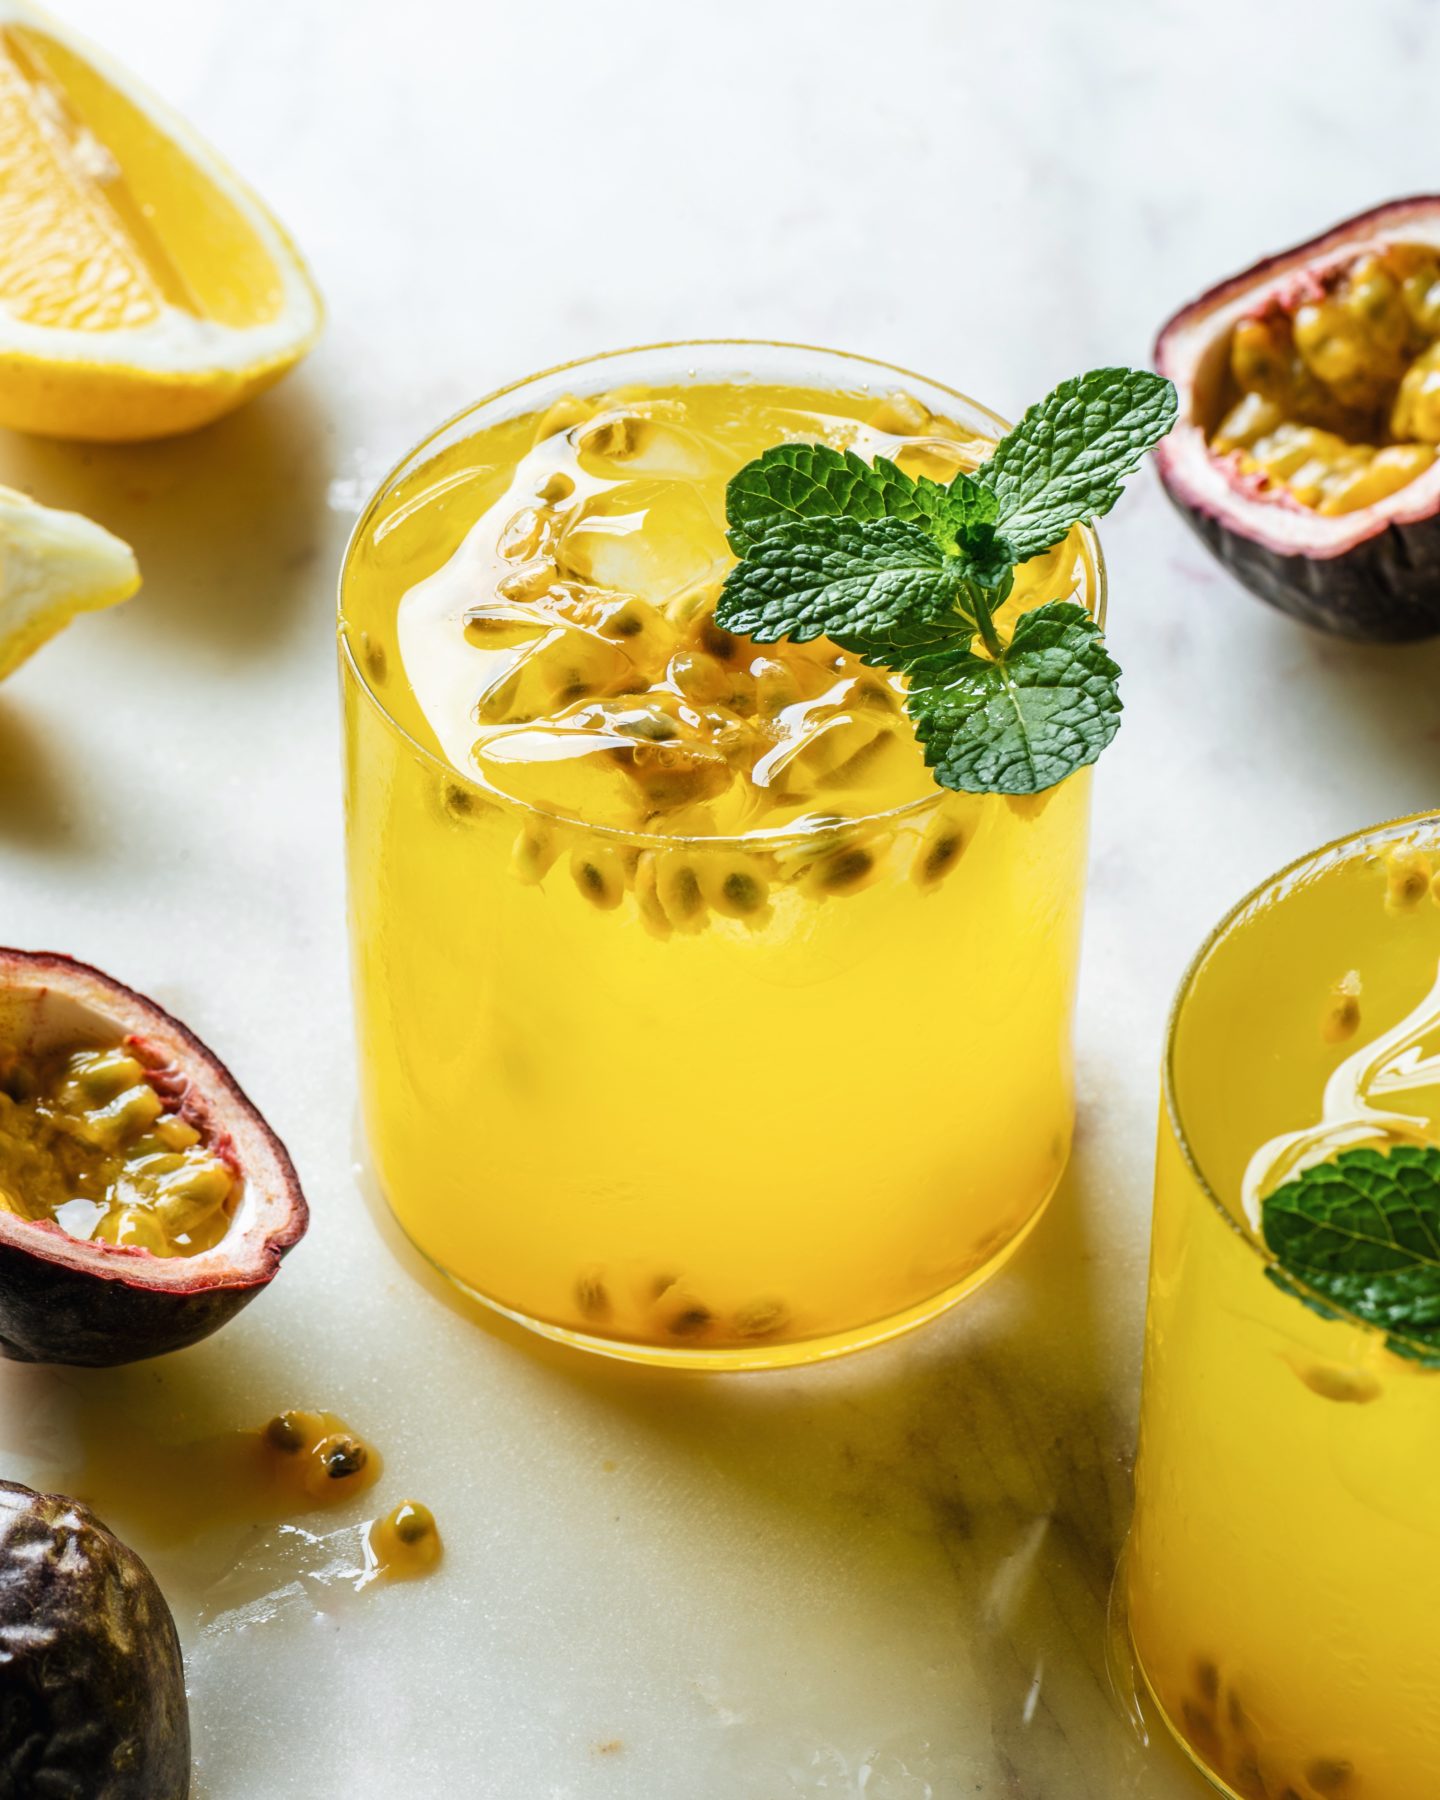 Refreshing Passionfruit Mint Lemonade in a glass next to sliced passionfruit